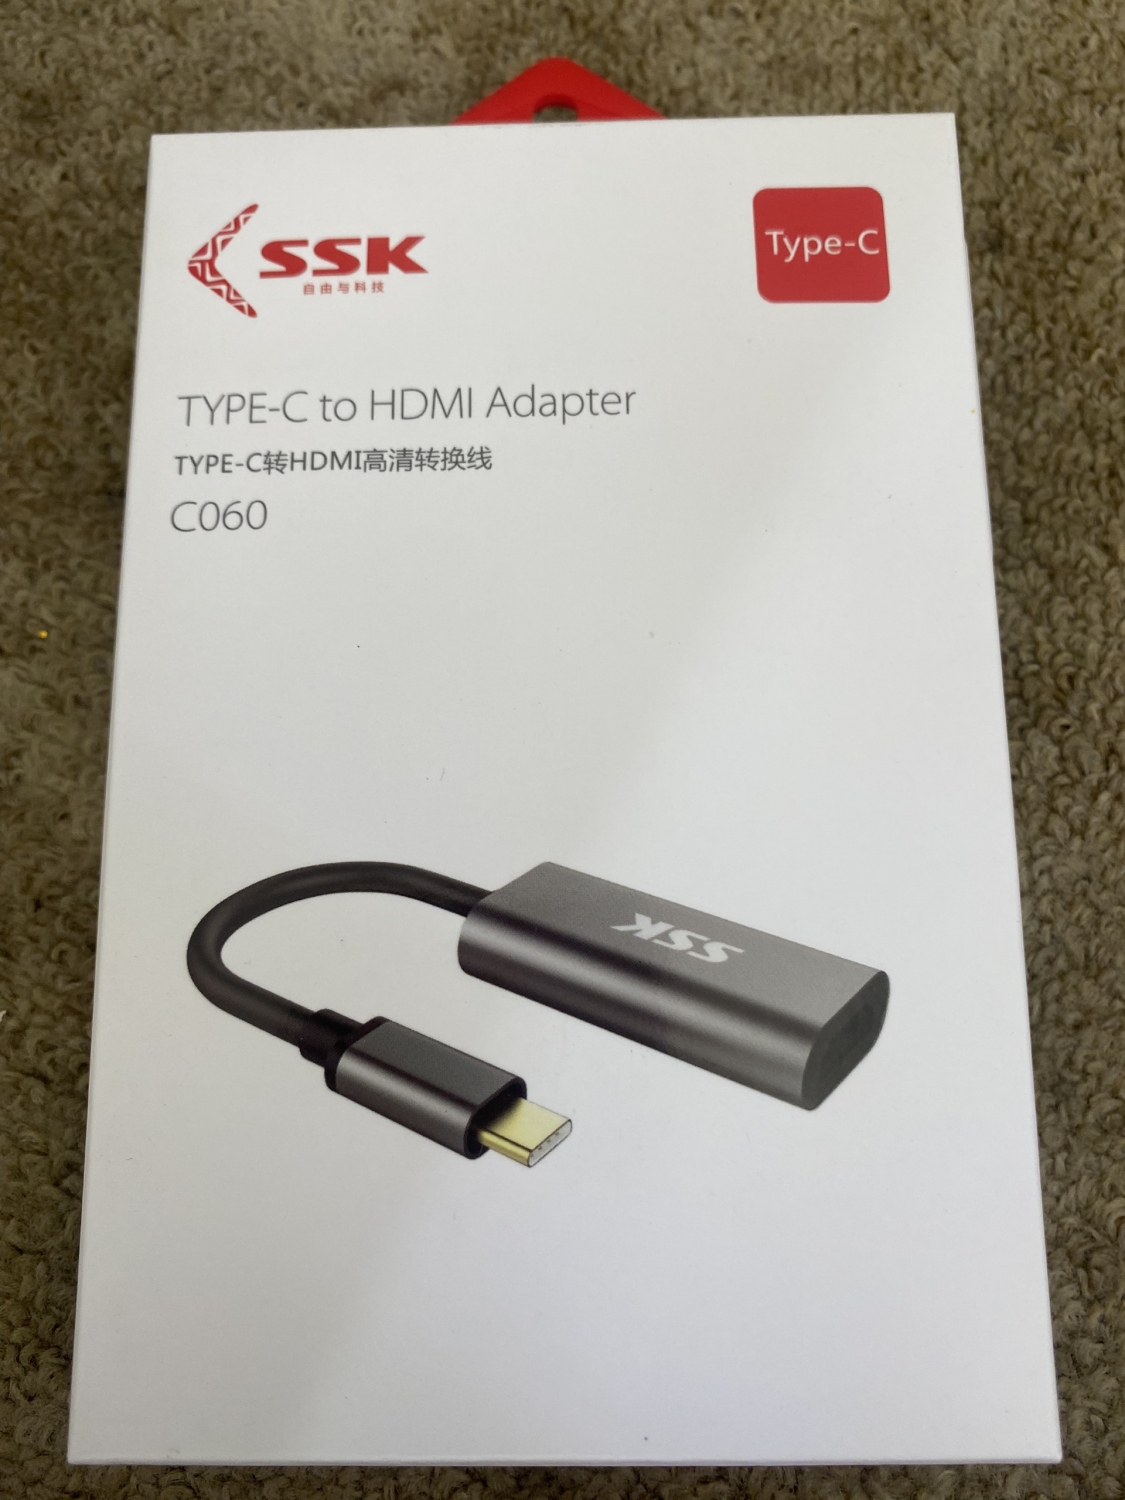 Type-c to HDMI Adapter SSK